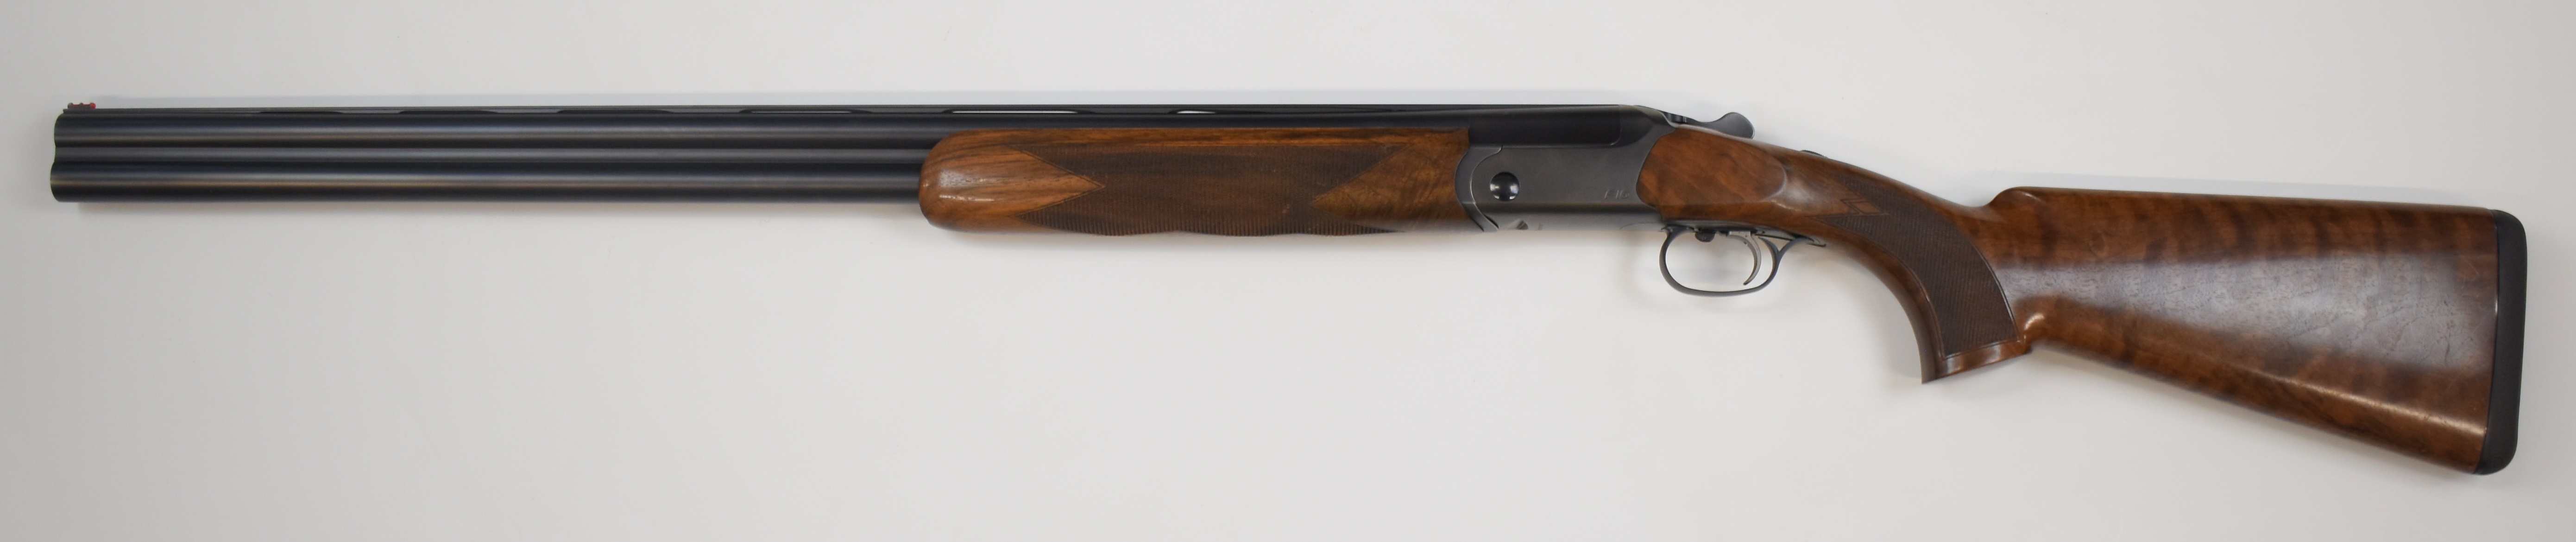 Blaser F16 12 bore over under ejector shotgun with named locks and underside, chequered semi- - Image 18 of 22